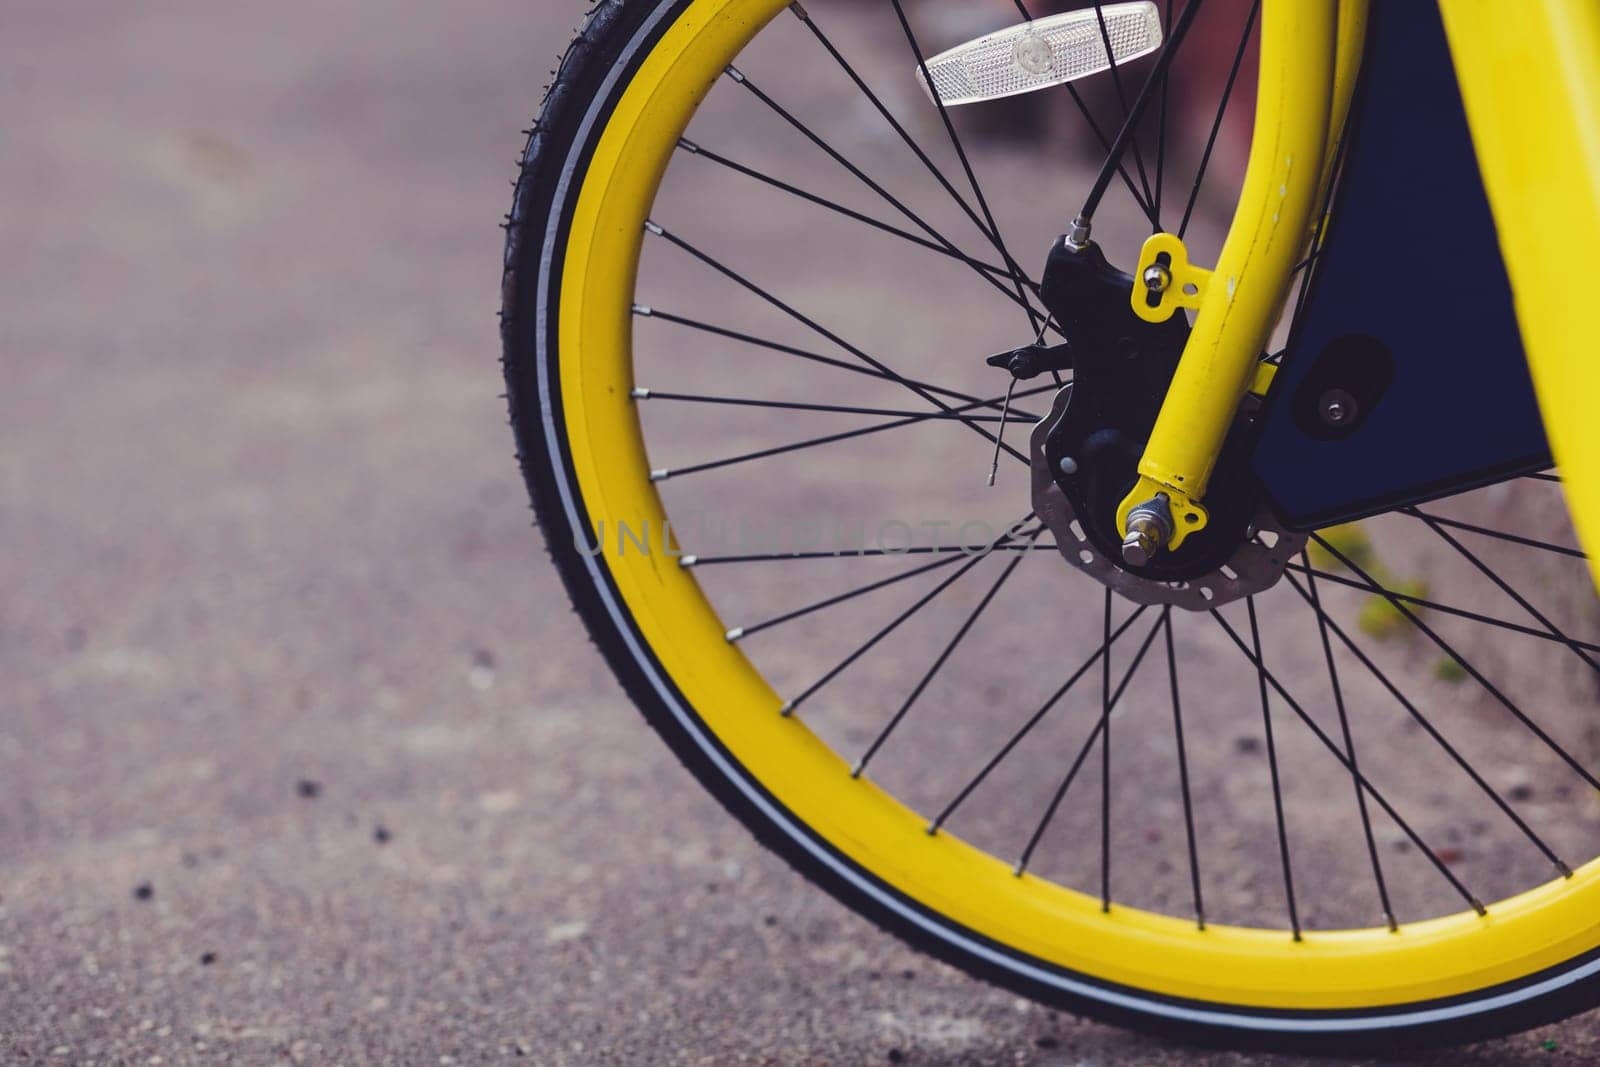 vintage yellow bicycle wheel in the city. Bicycle rentals